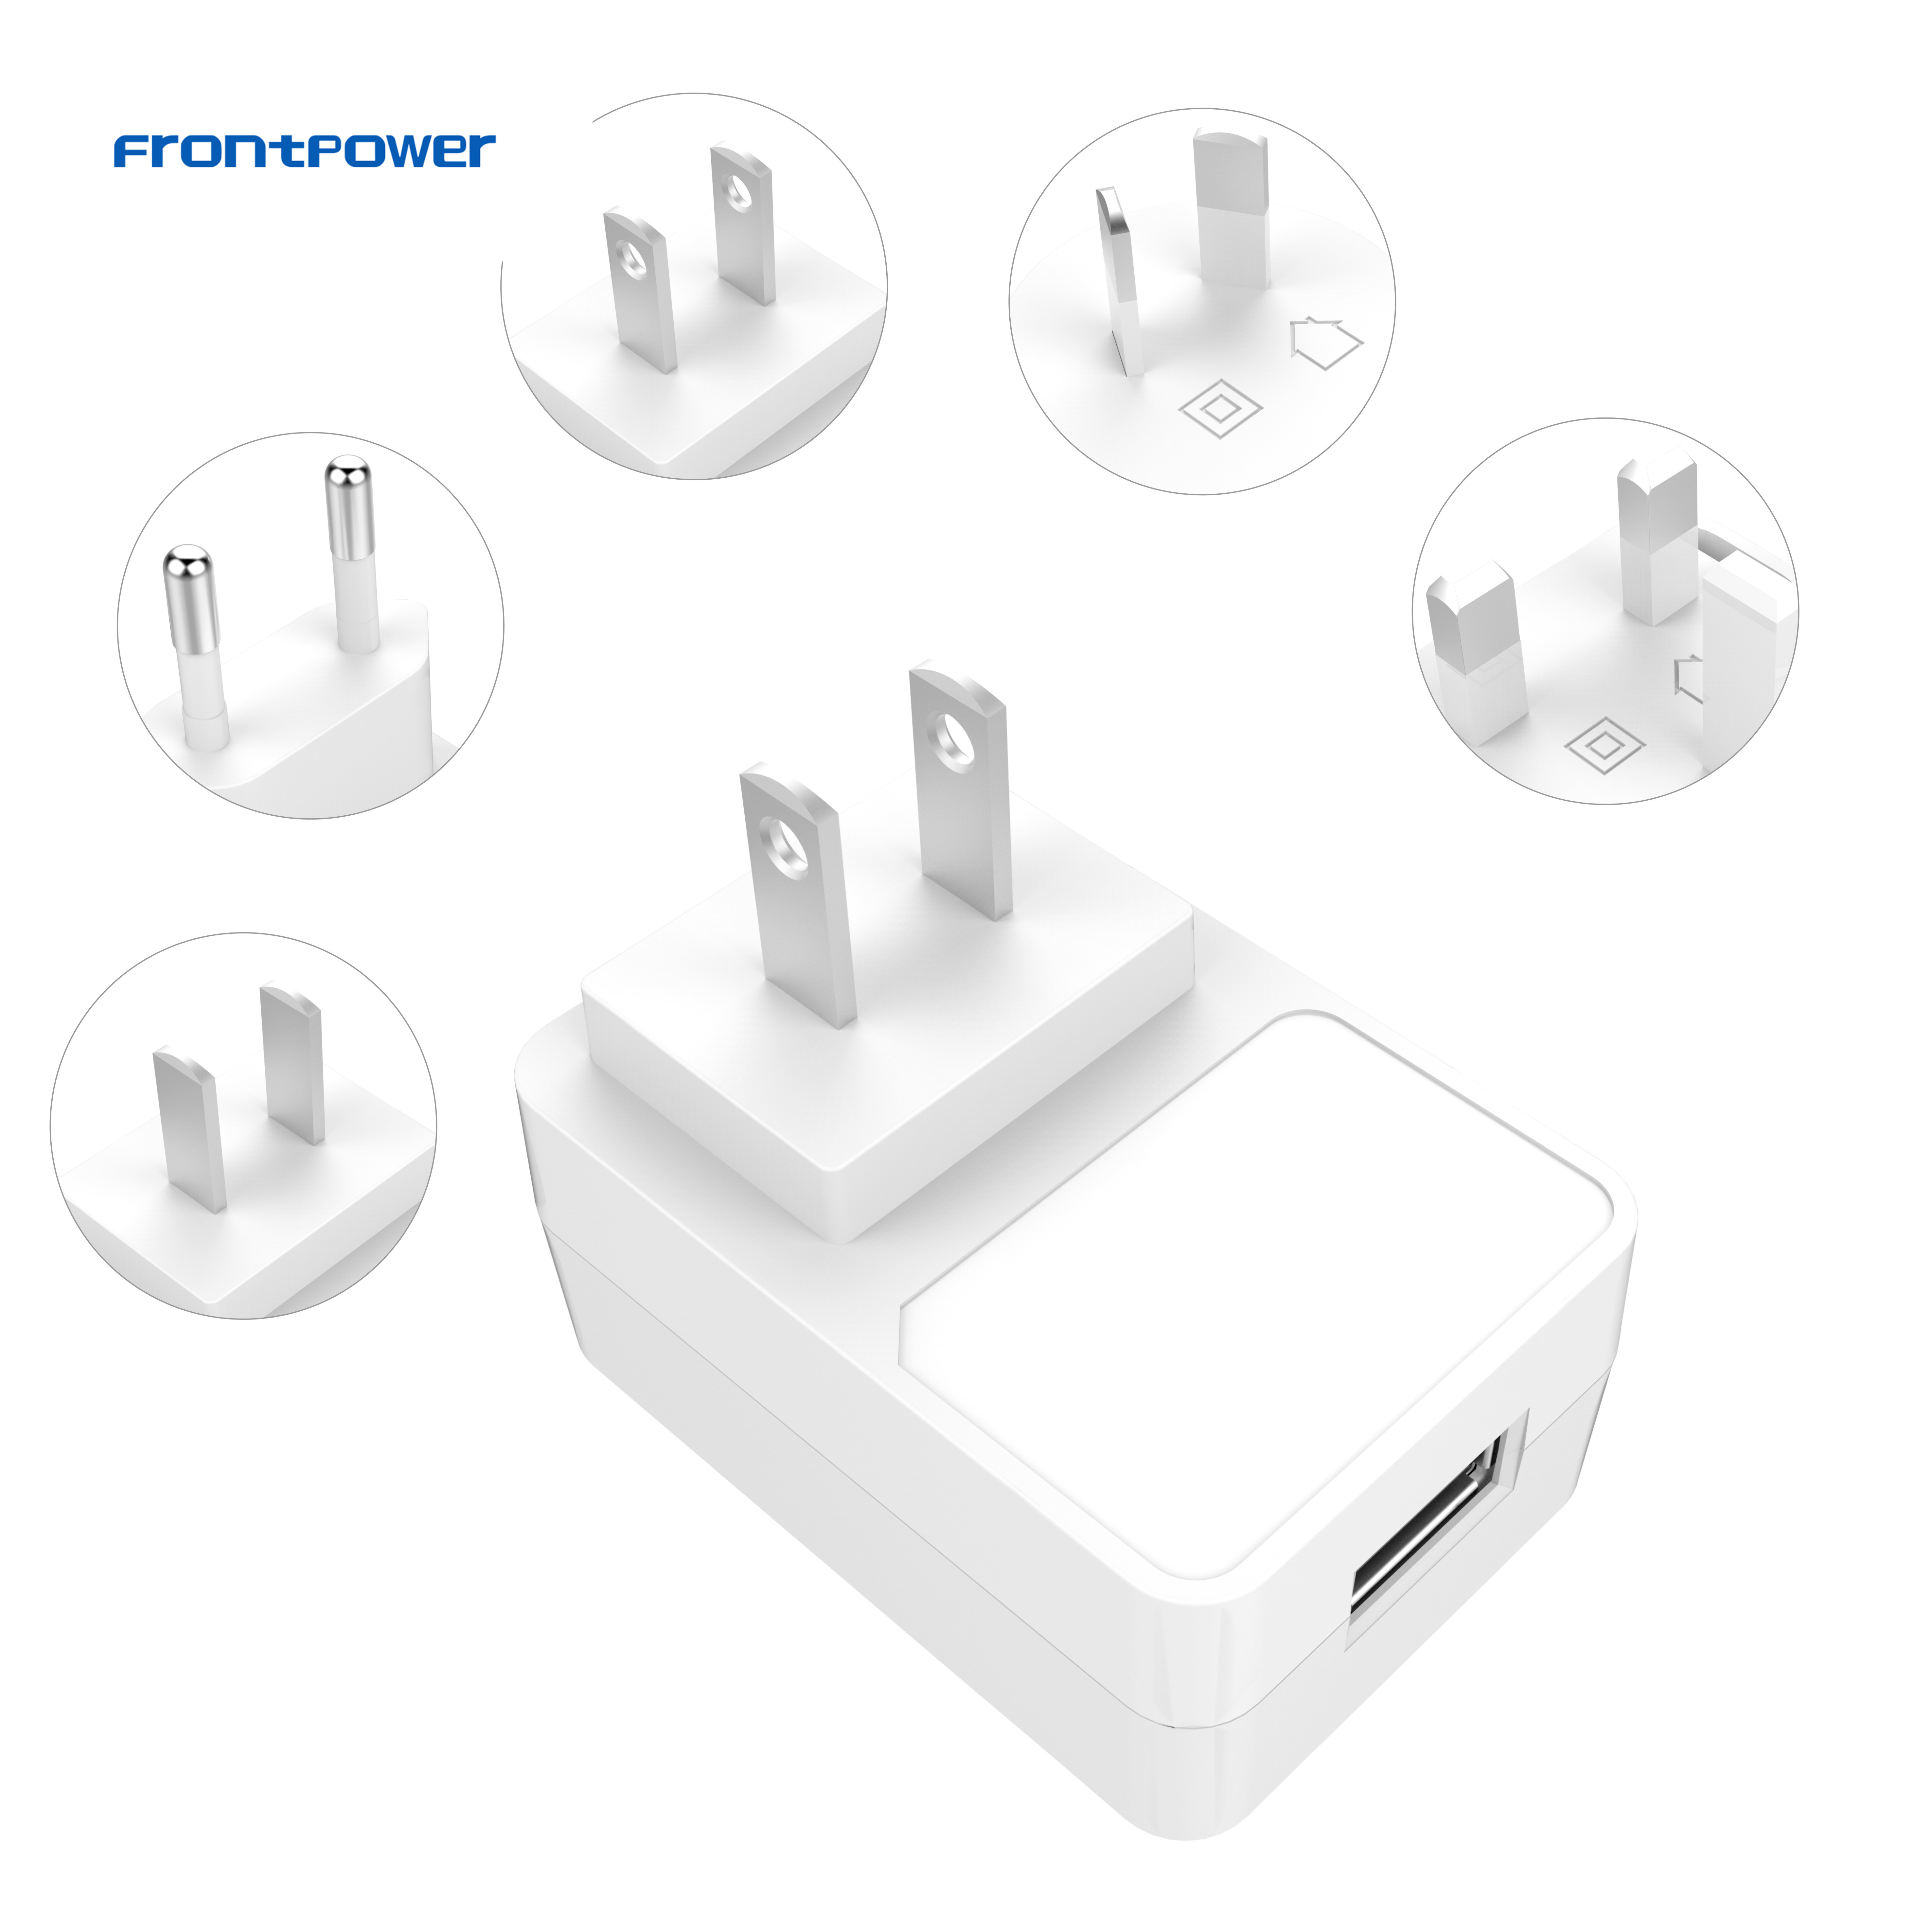 Frontpower 5V 2.4A US power adapter usb charger portable travel with UL FCC certs for phone